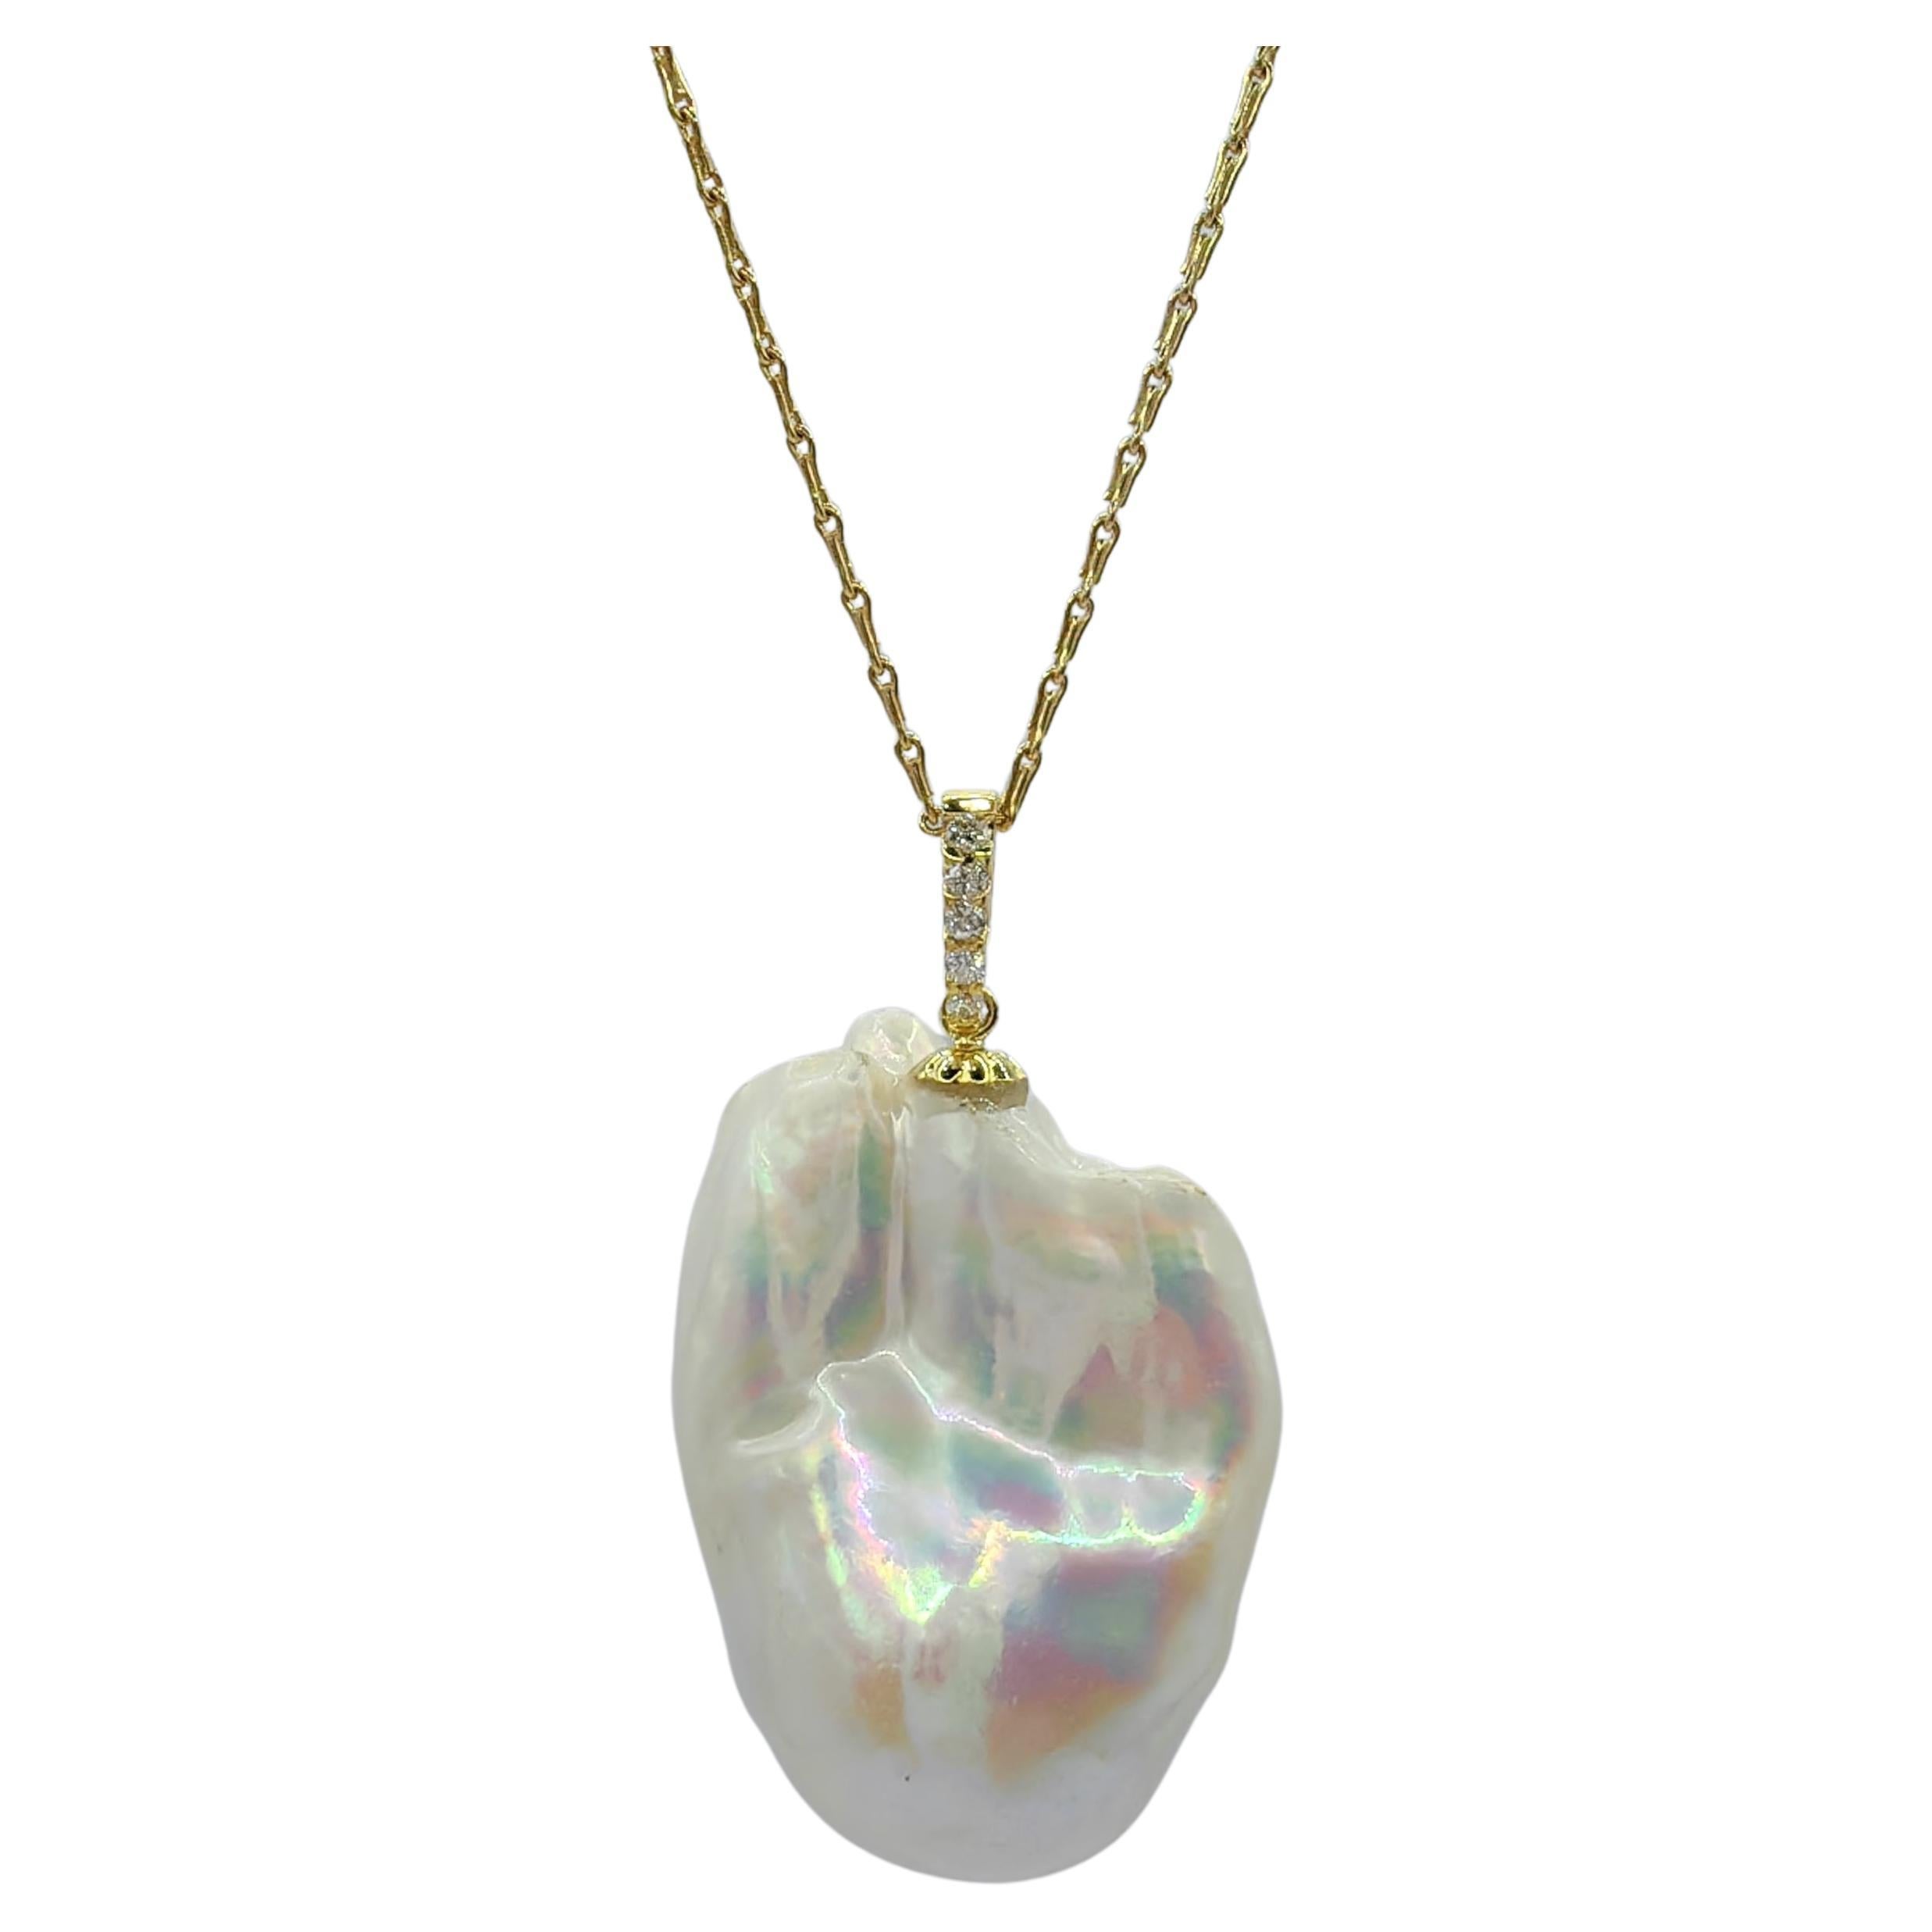 49.24ct Large Iridescent Baroque Pearl Diamond 18K Yellow Gold Necklace Pendant For Sale